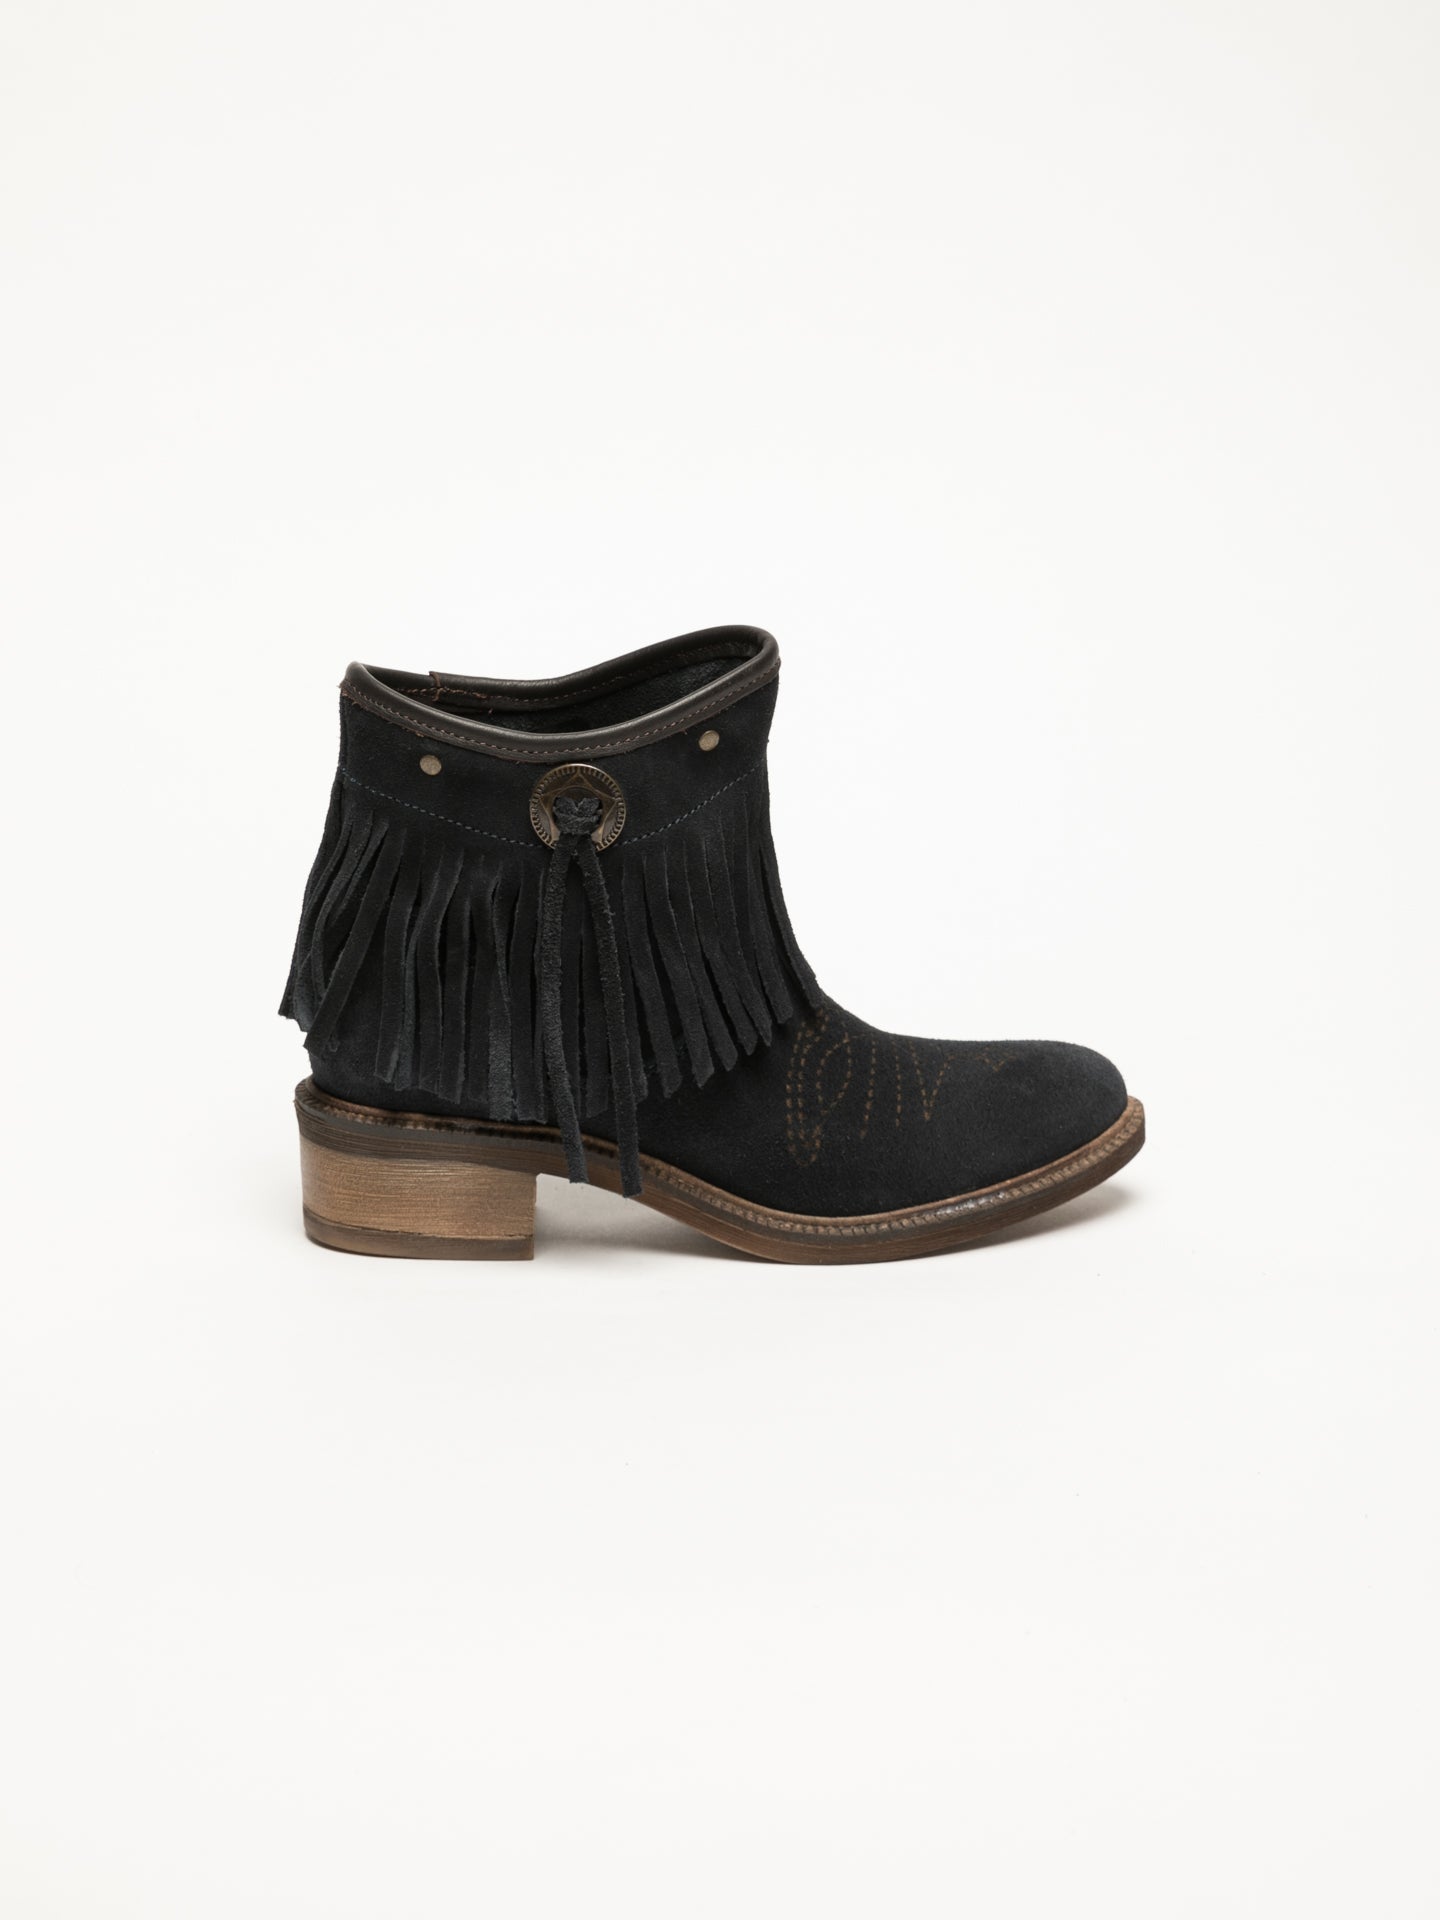 Foreva Blue Fringed Ankle Boots